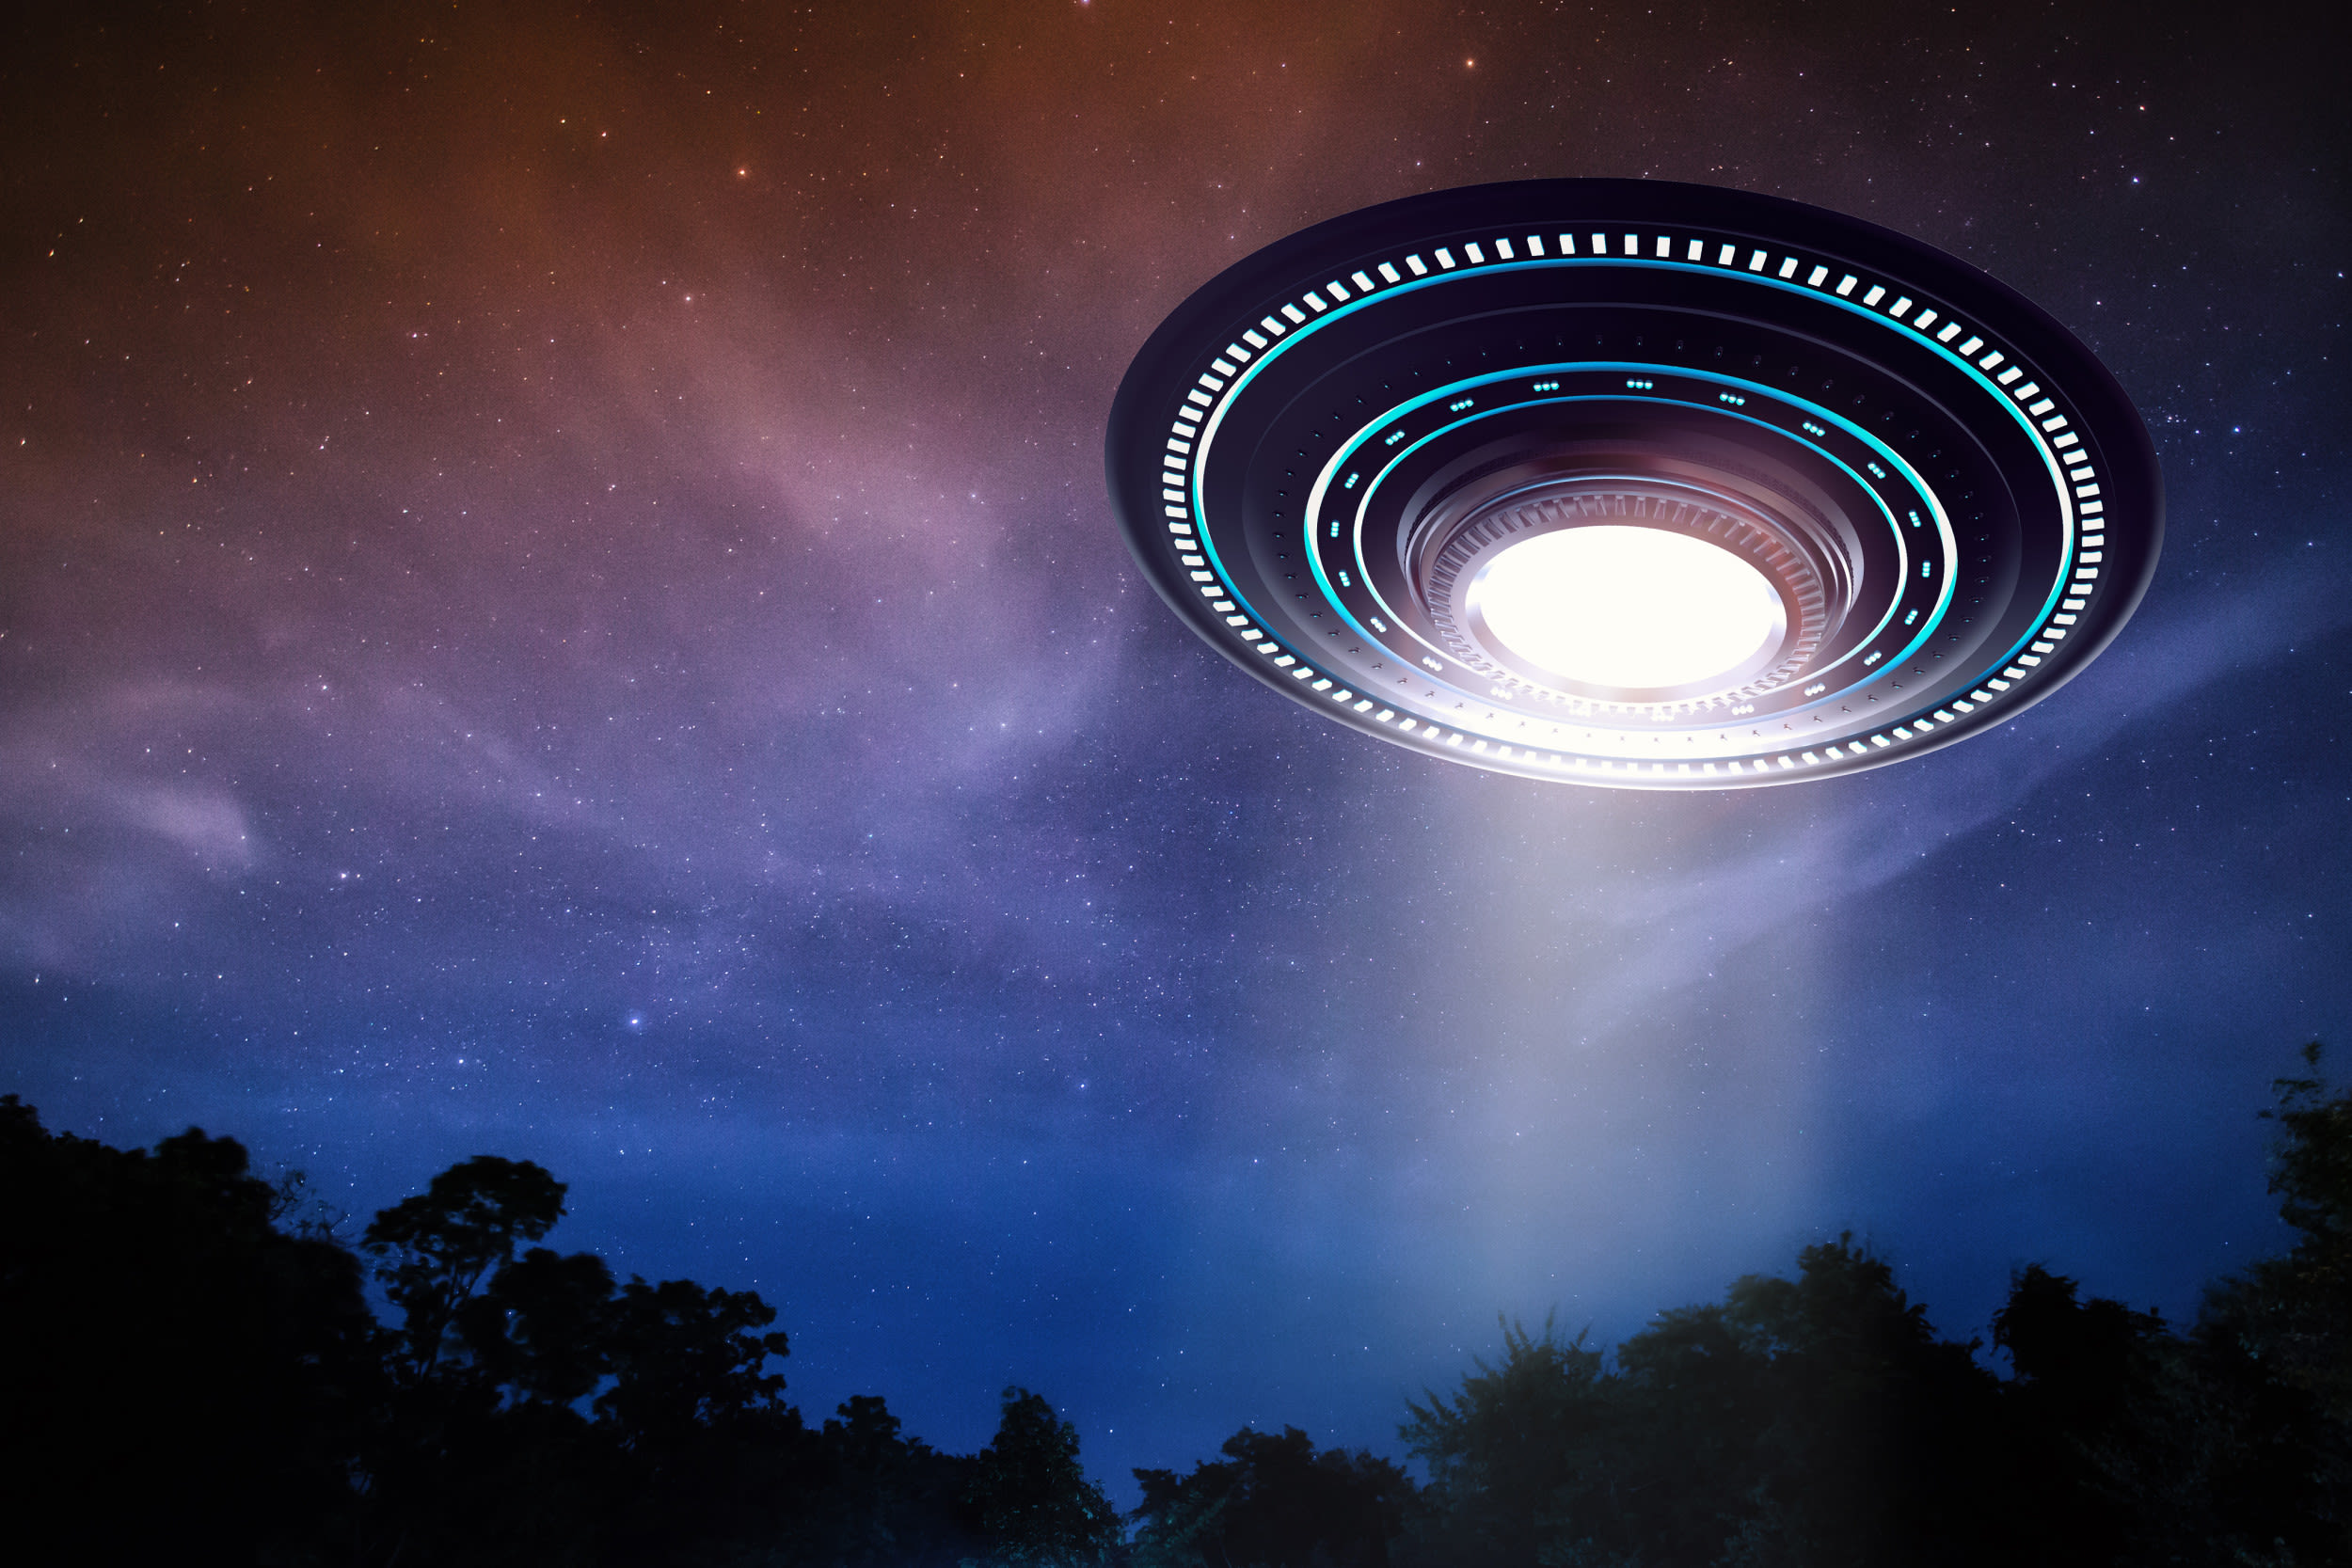 Mysterious spiral "UFO" sightings reported across US, Europe